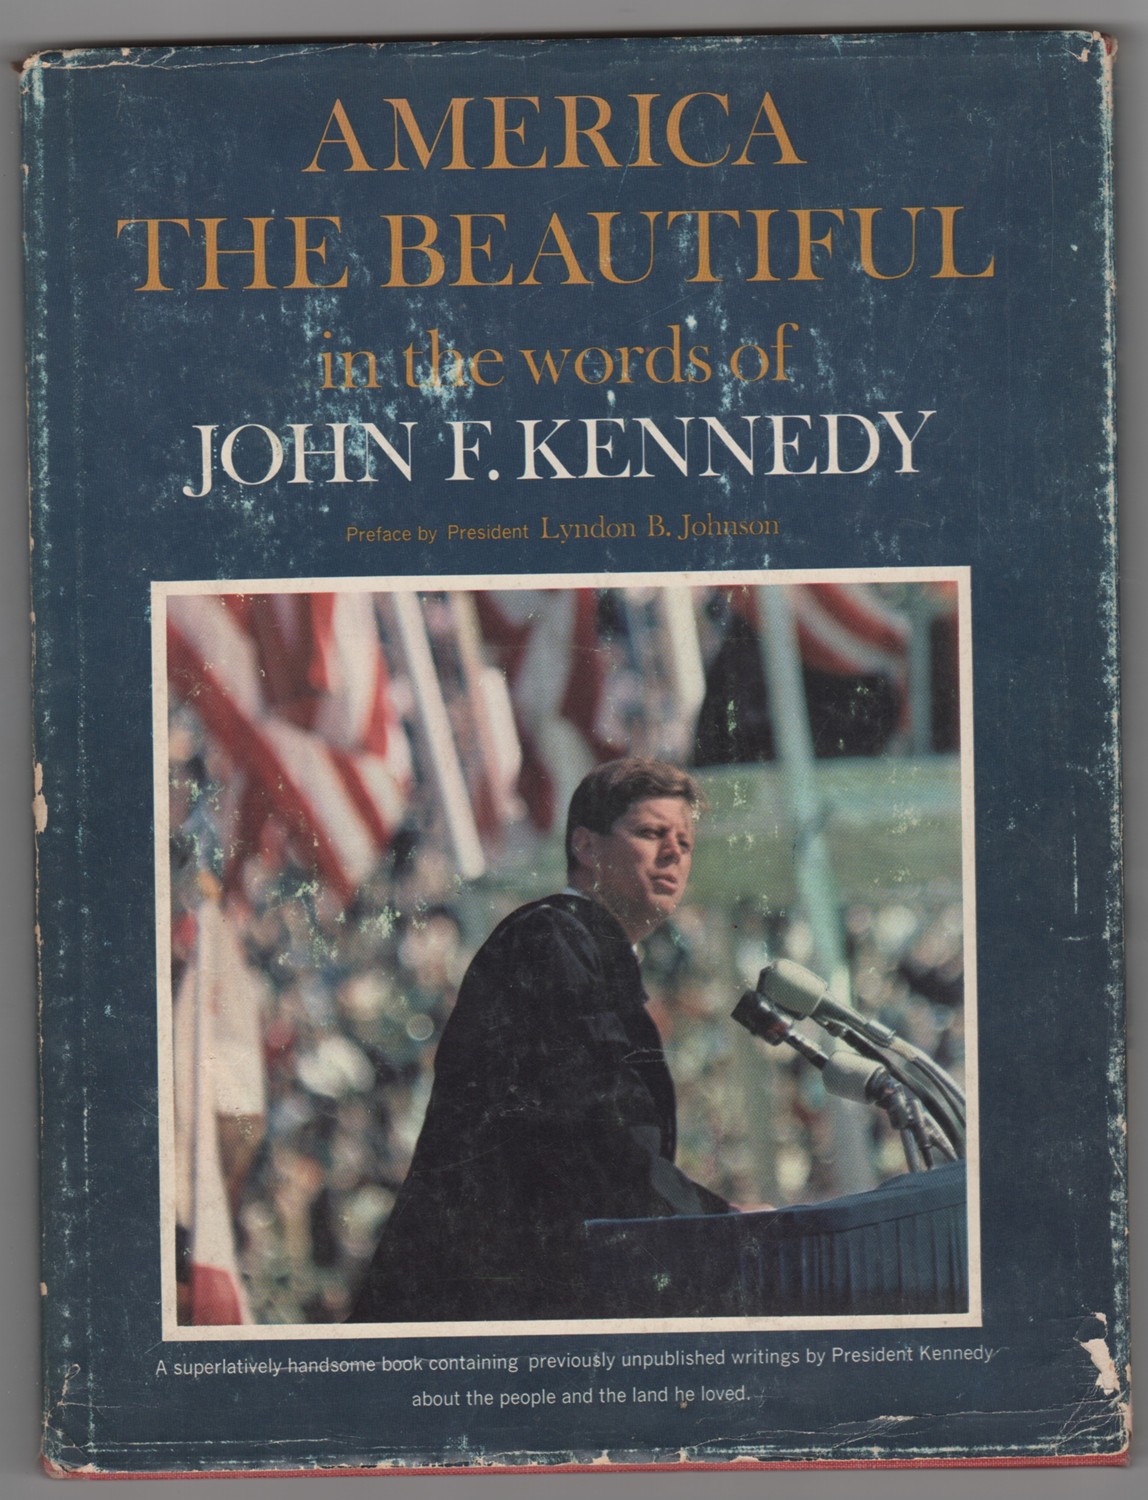 POLLEY, ROBERT L. (EDITOR) - America the Beautiful in the Words of John F. Kennedy